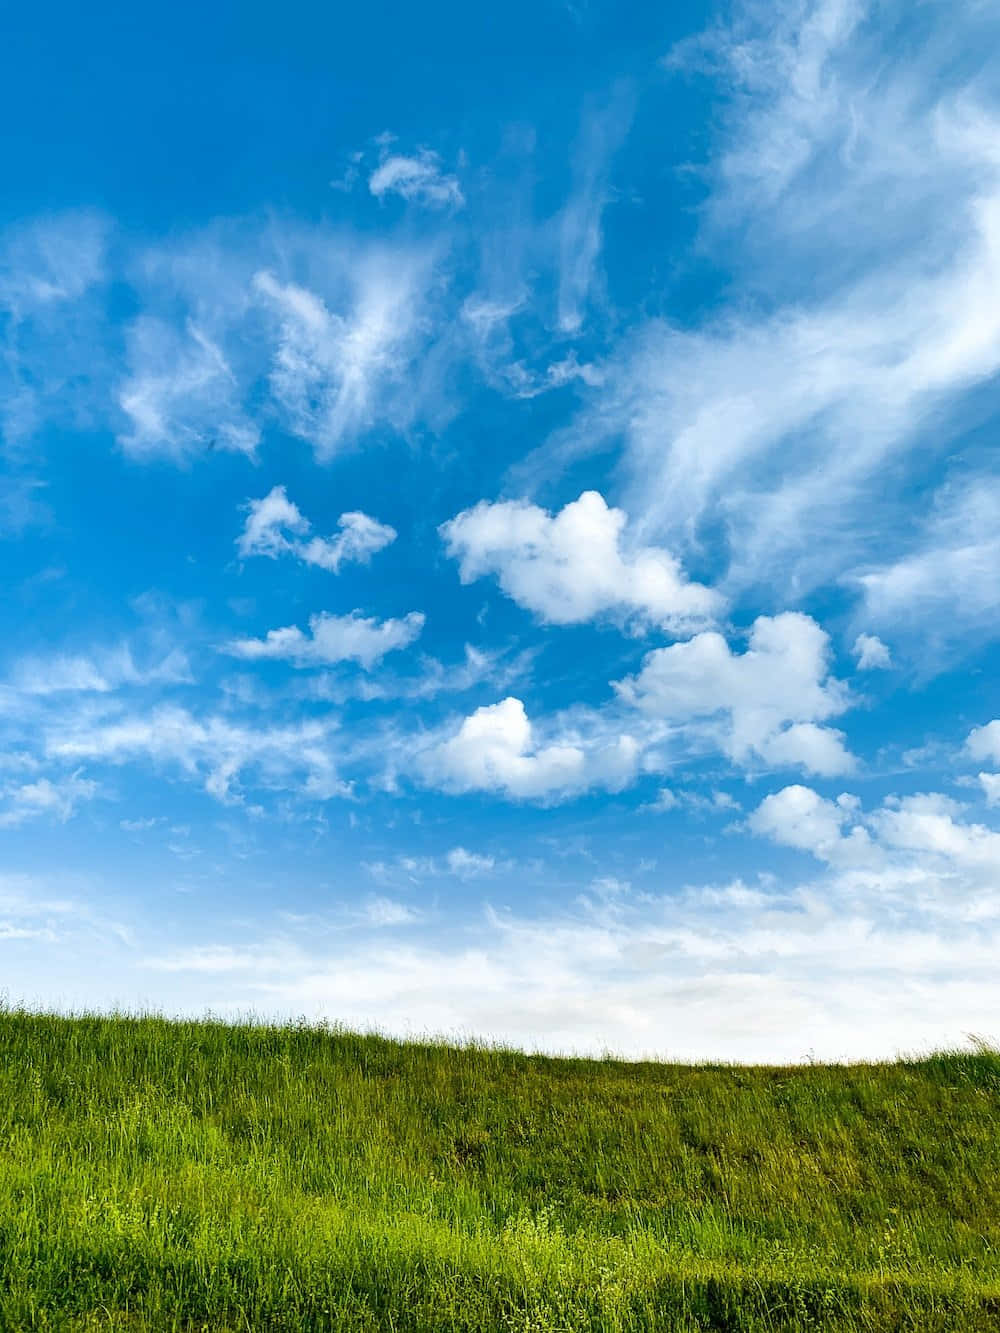 Green Grass And Blue Sky Hues Background